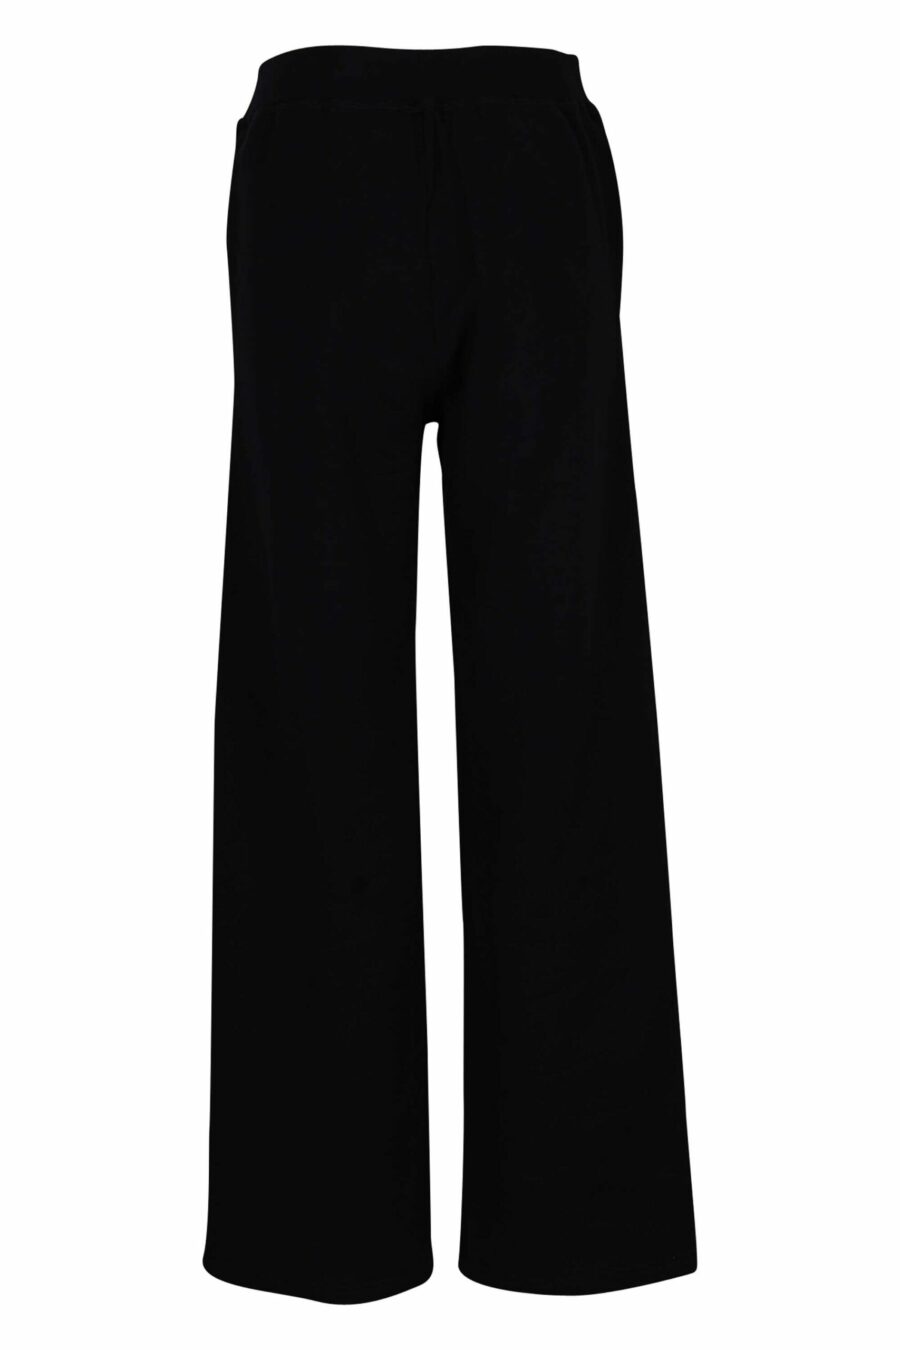 Black trousers with transparent heart logo - 8054148304249 2 scaled